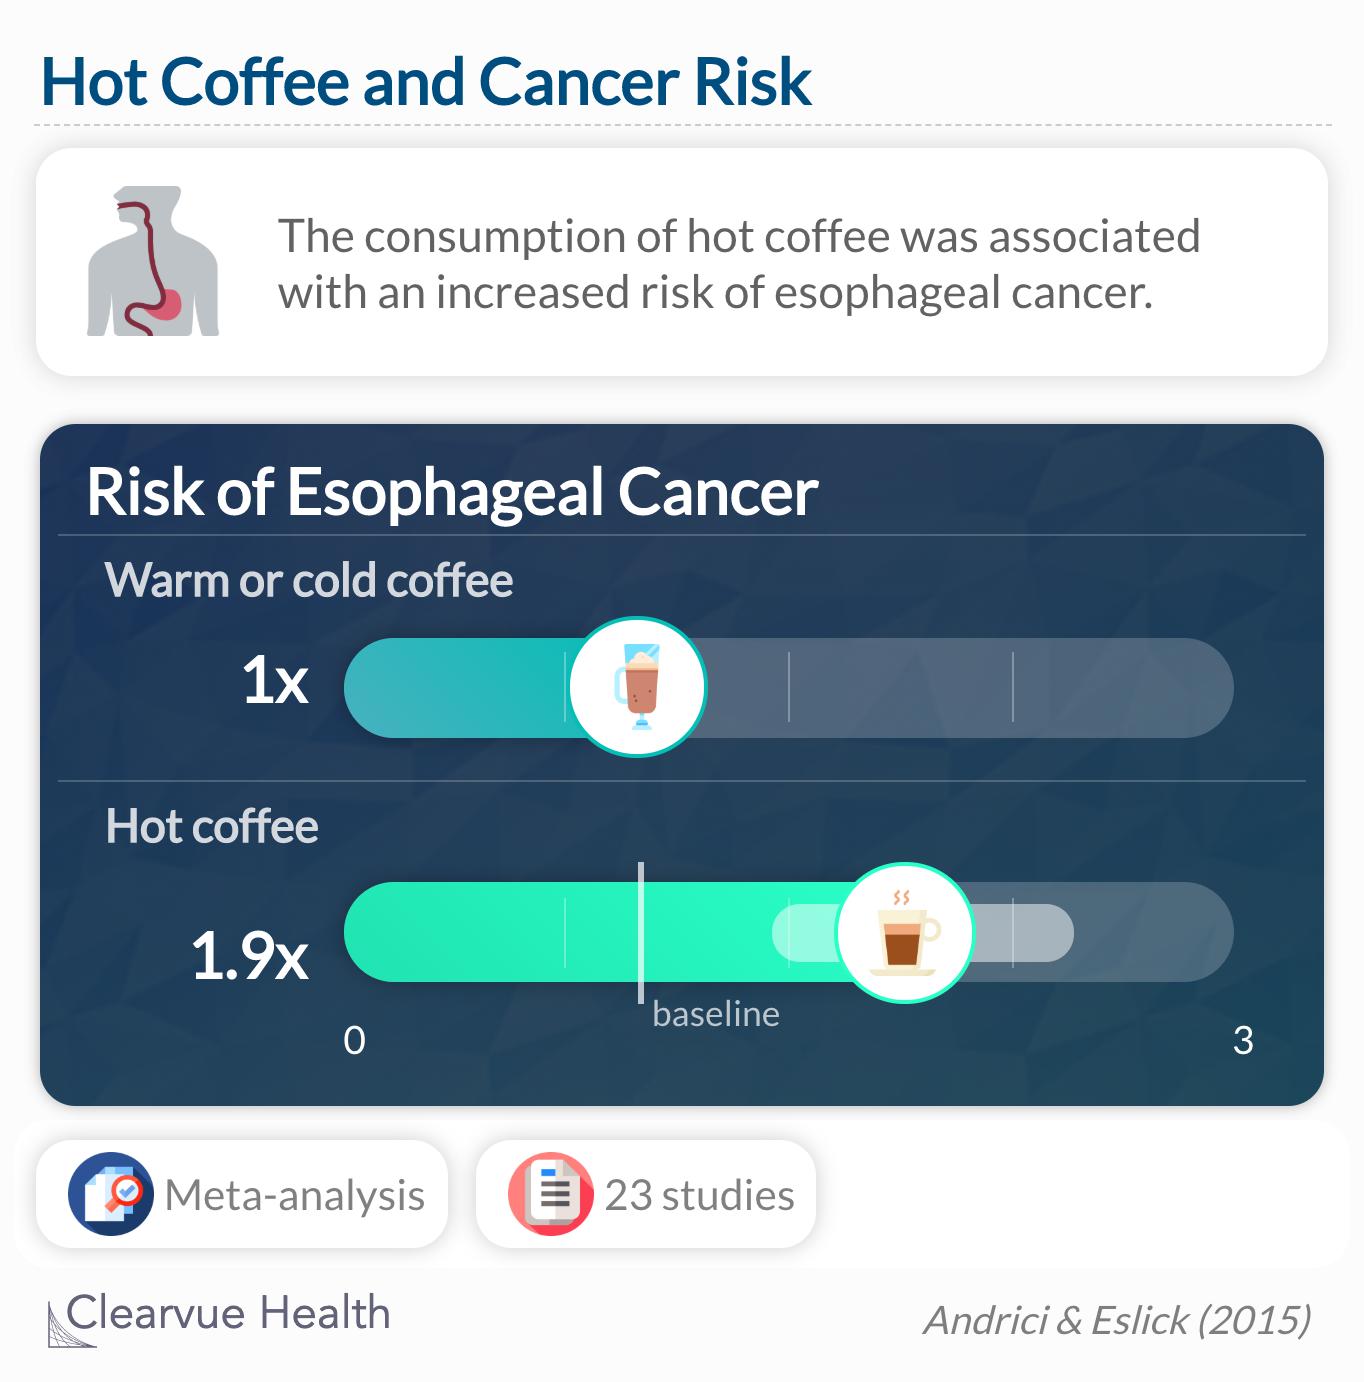 The consumption of hot food and beverages was associated with an increased risk of esophageal cancer, particularly ESCC.